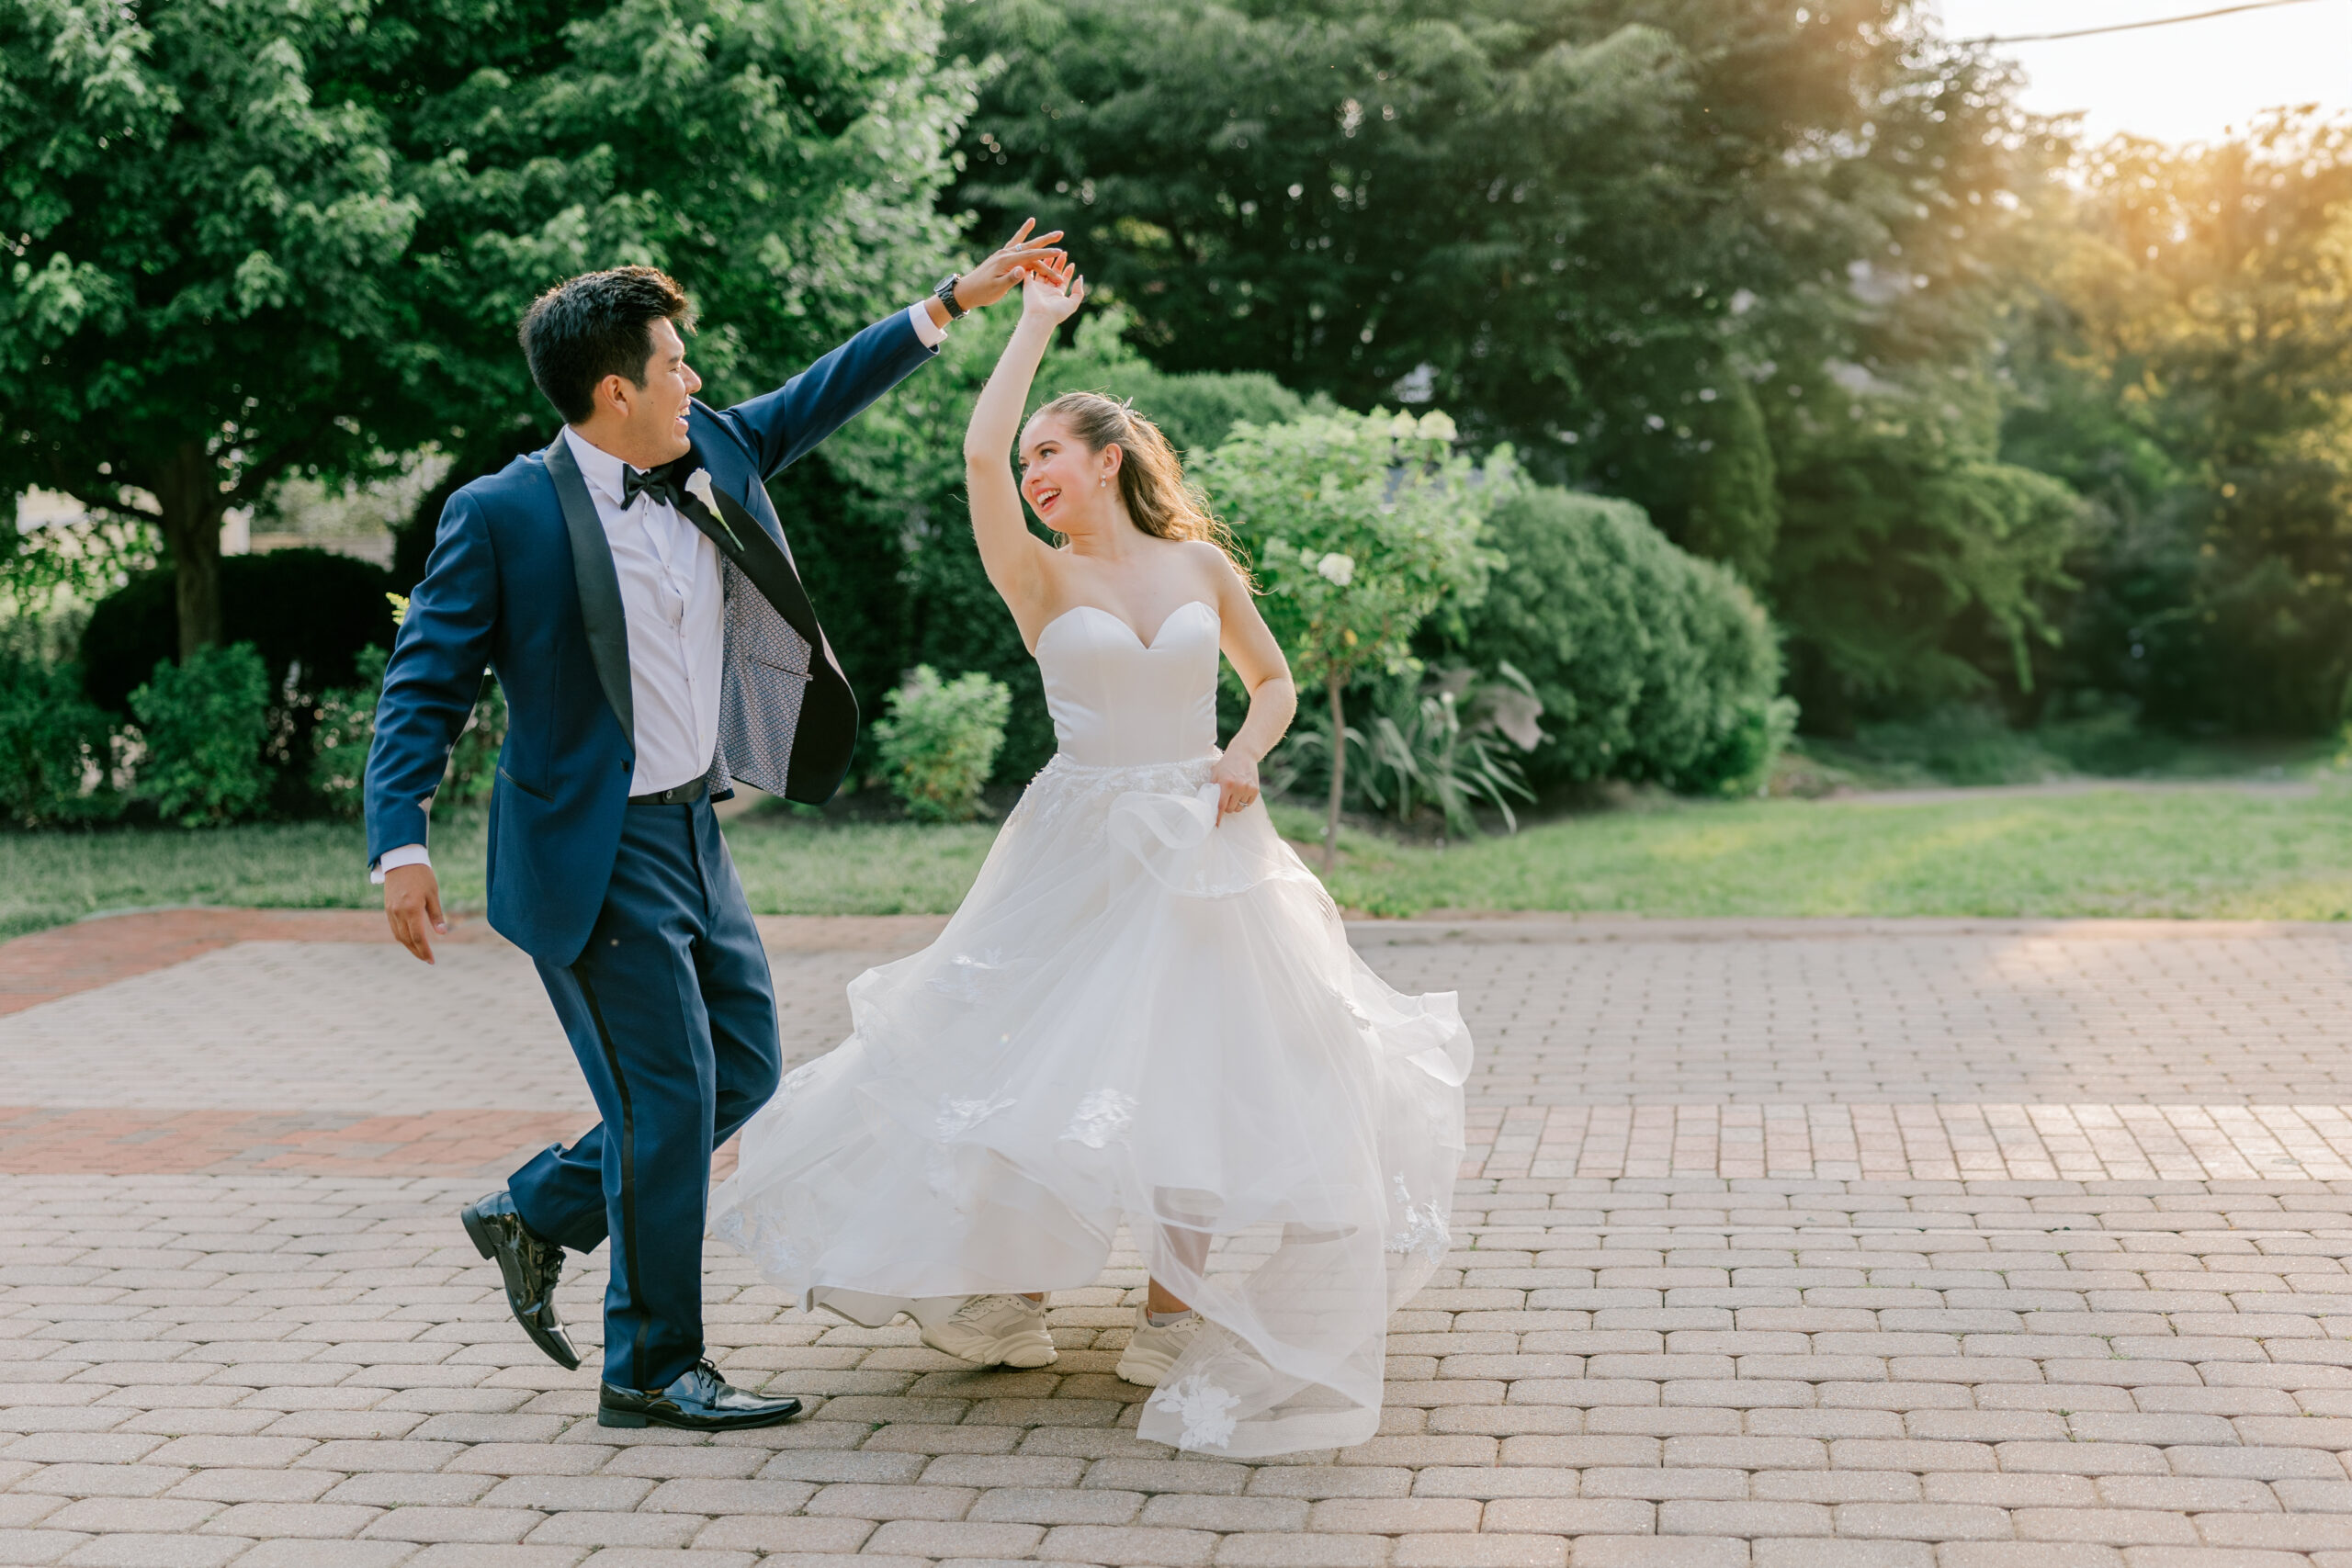 the bride and groom twirl during their posed portraits on their wedding day at Birkby House